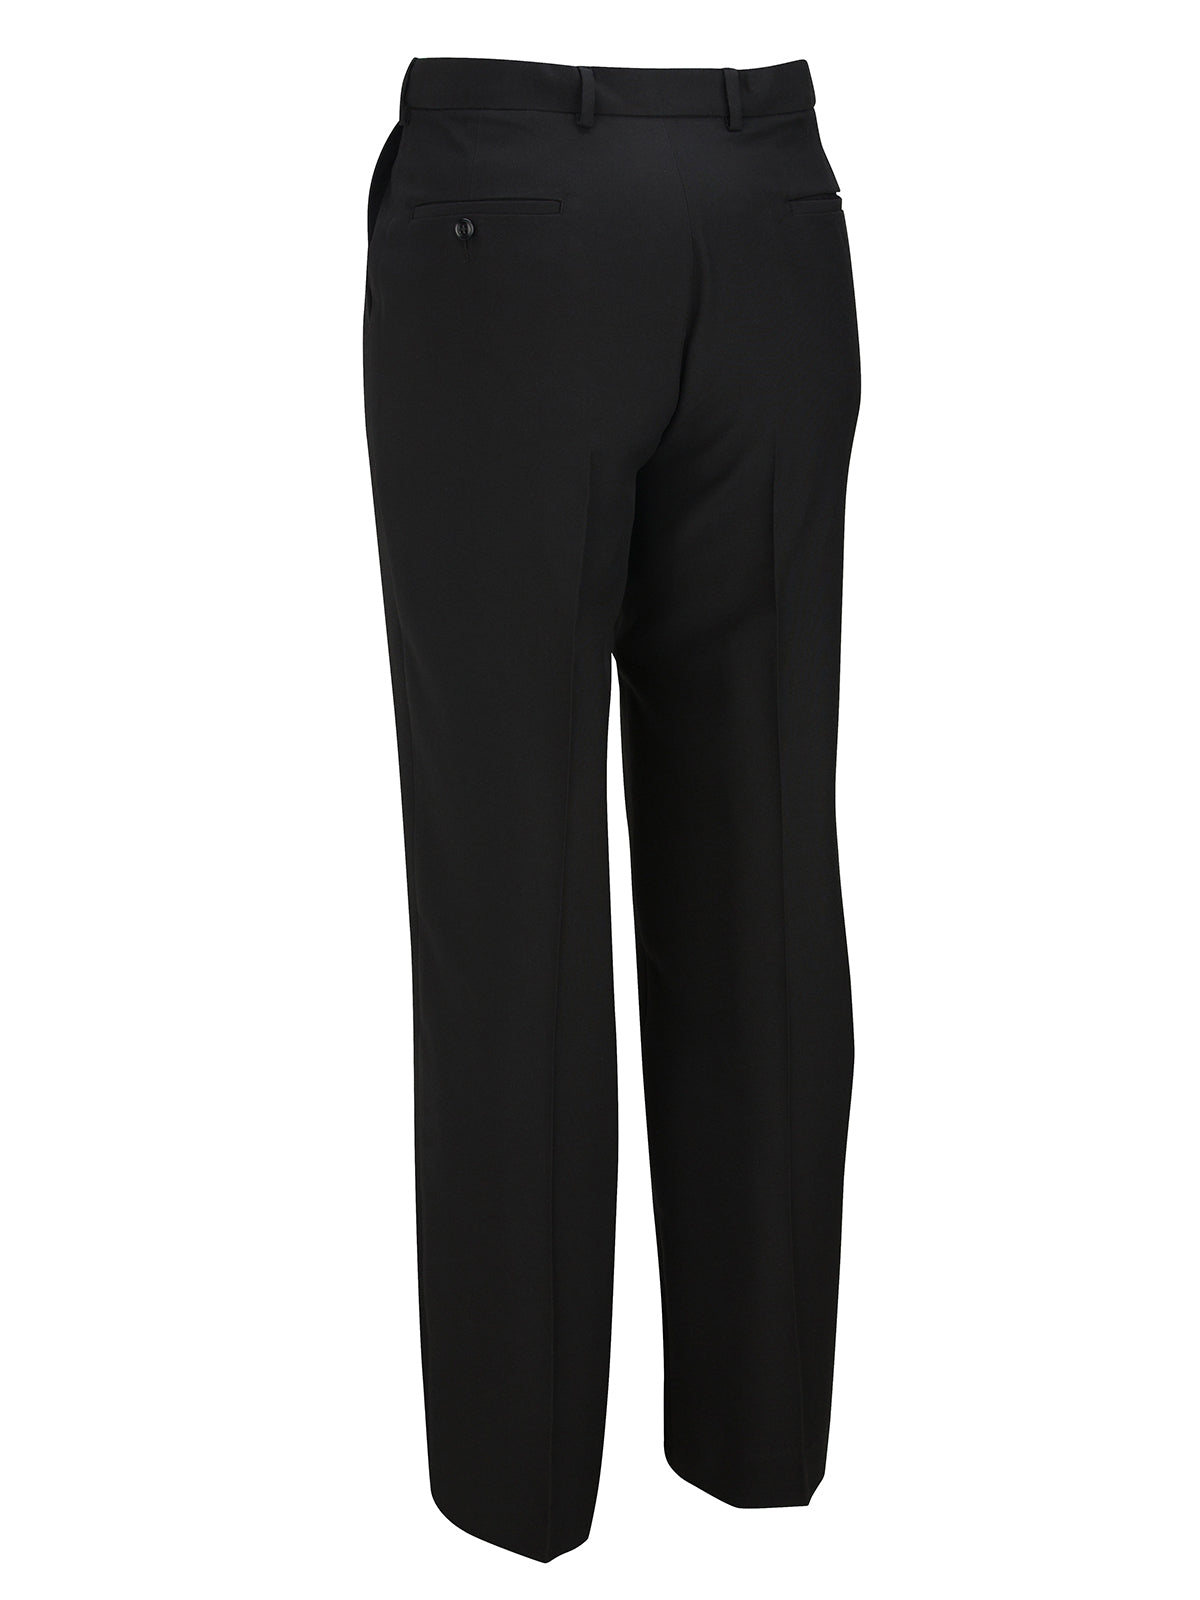 Men's Easy Fit Pant (Sizes: 28 x 26 to 42 x 34)